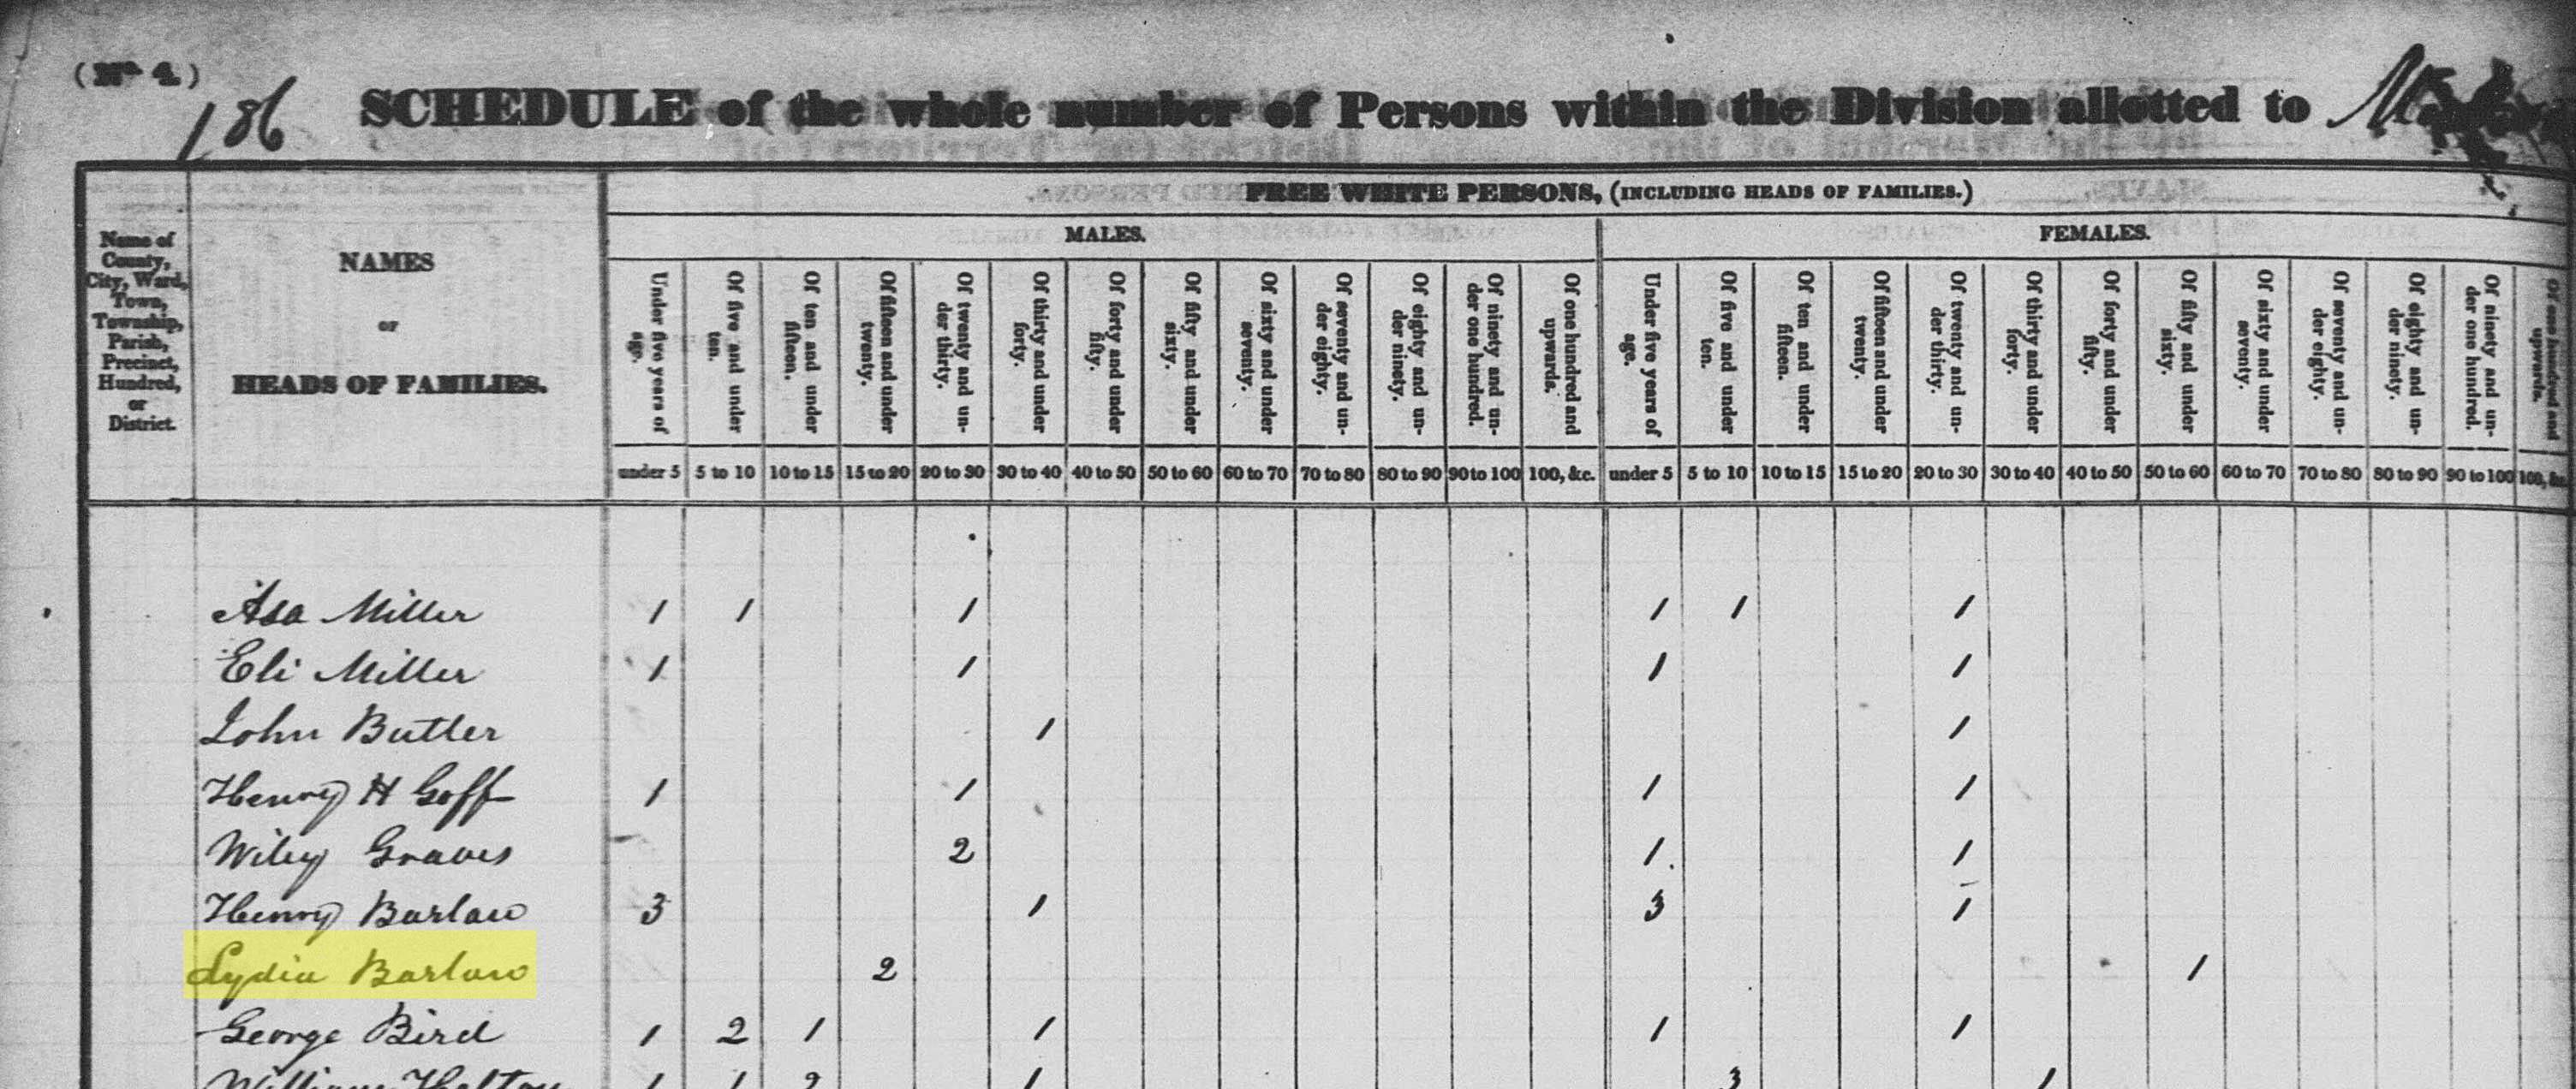 Evidence of Lydia Barlow in the 1830 census